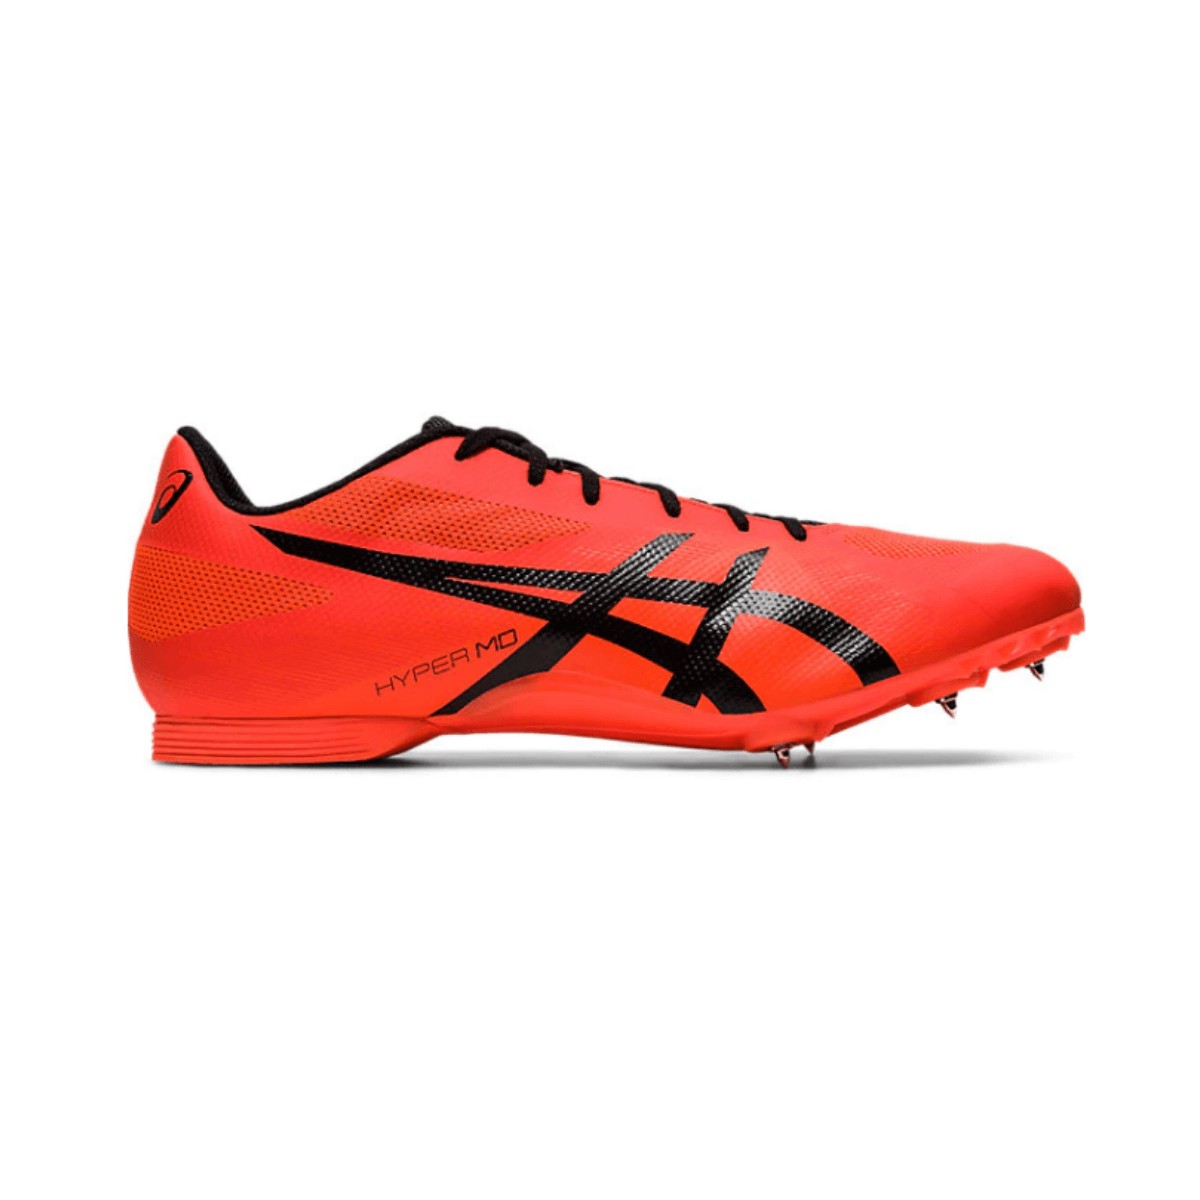 Chaussures Asics Hyper MD 7 Rouge Noir Unisexe, Taille 35,5 euros